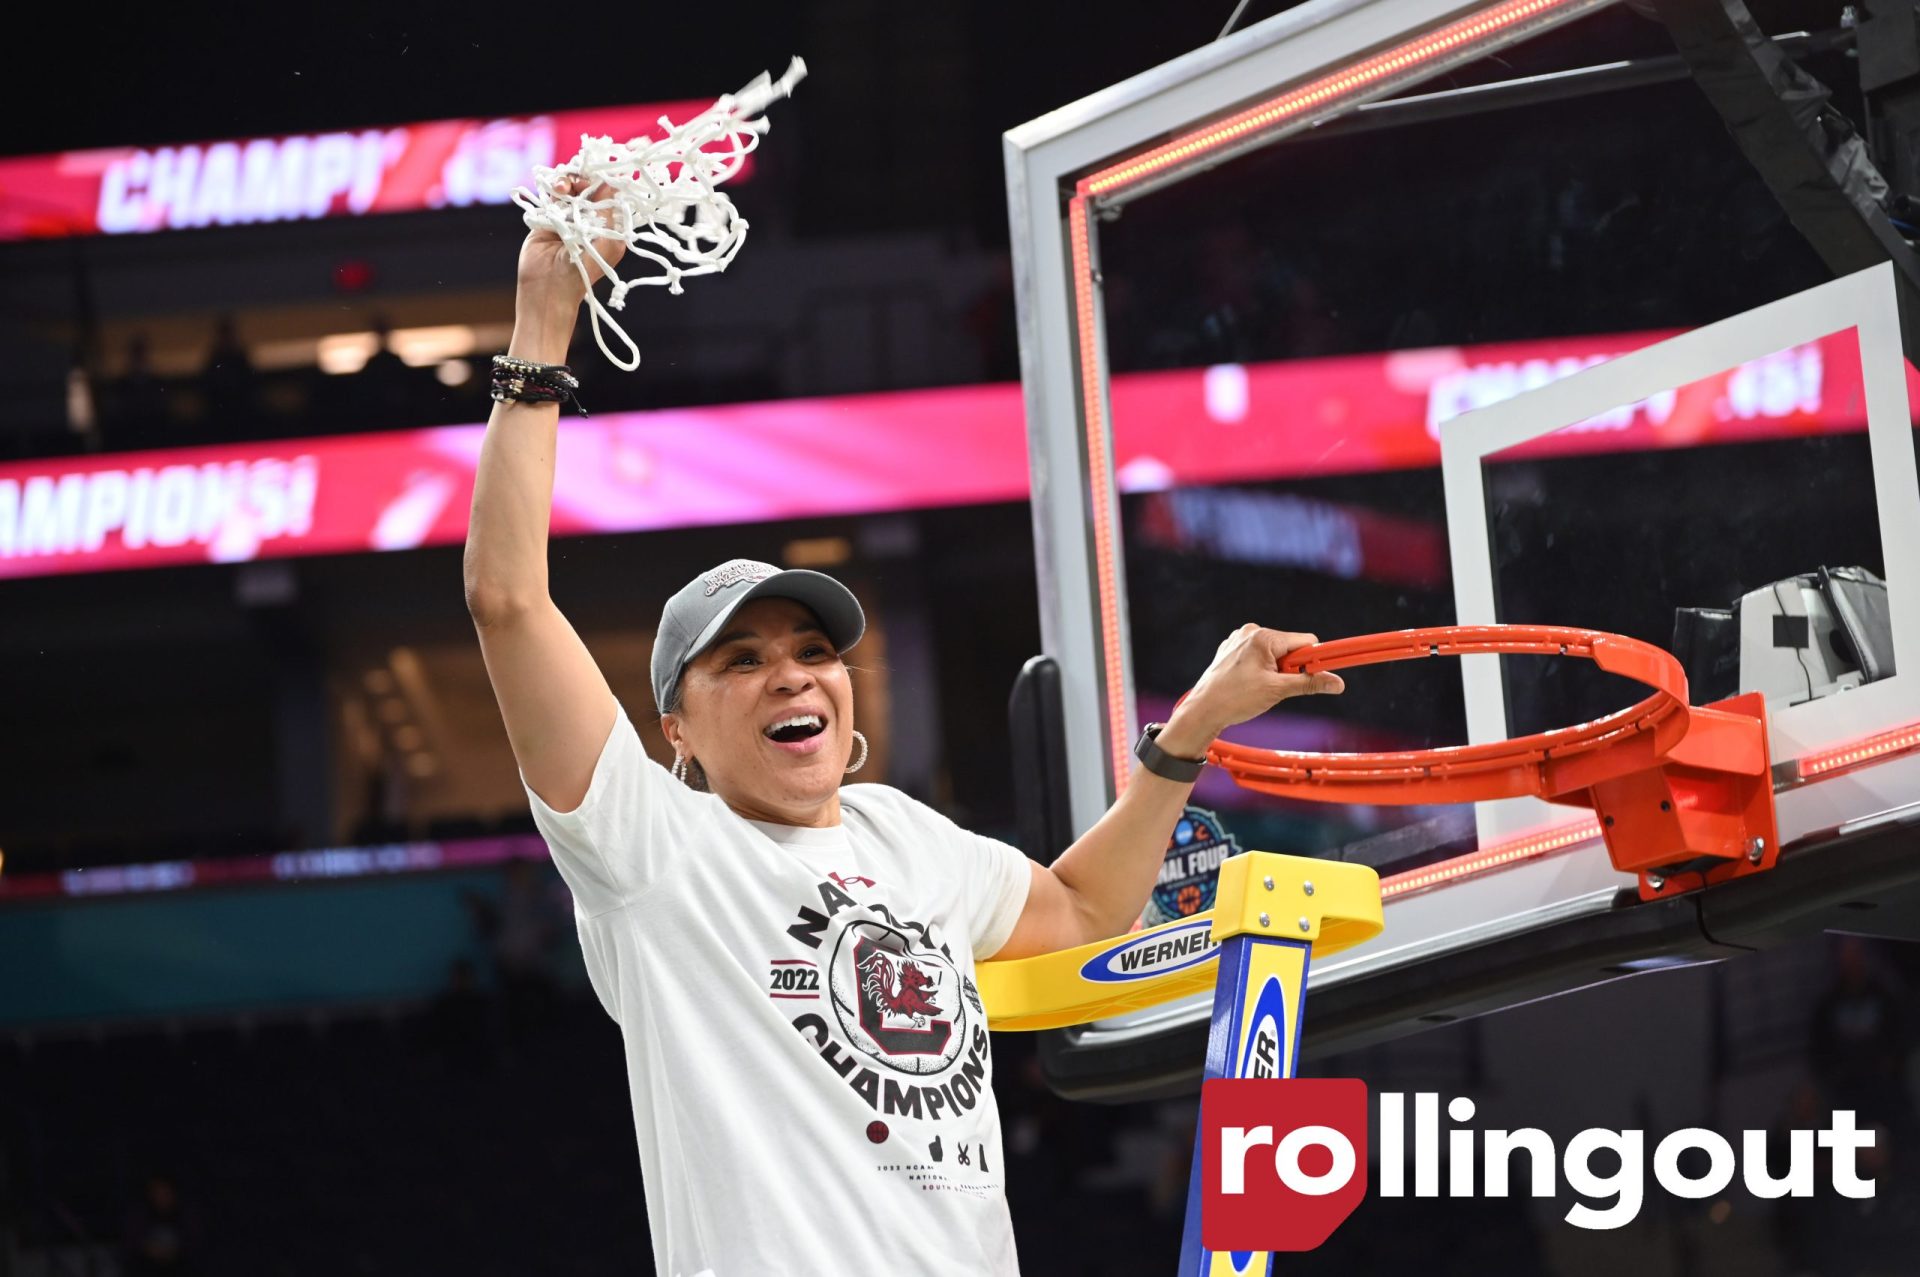 How Dawn Staley paid homage to Randall Cunningham before the Super Bowl